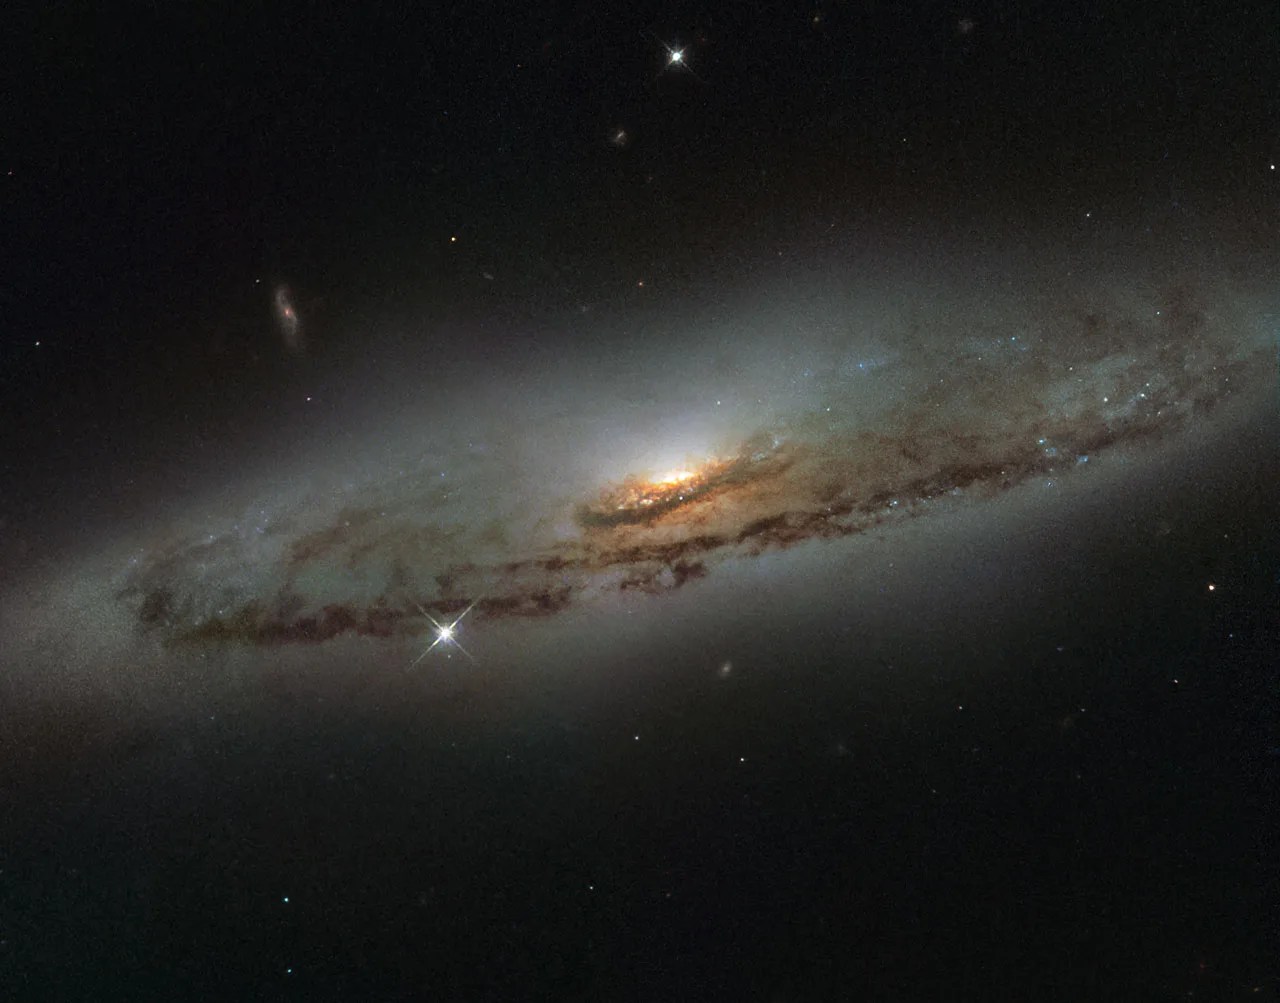 Image of spiral galaxy ngc 4845, a flat and dust-mottled disk surrounding a bright galactic bulge.